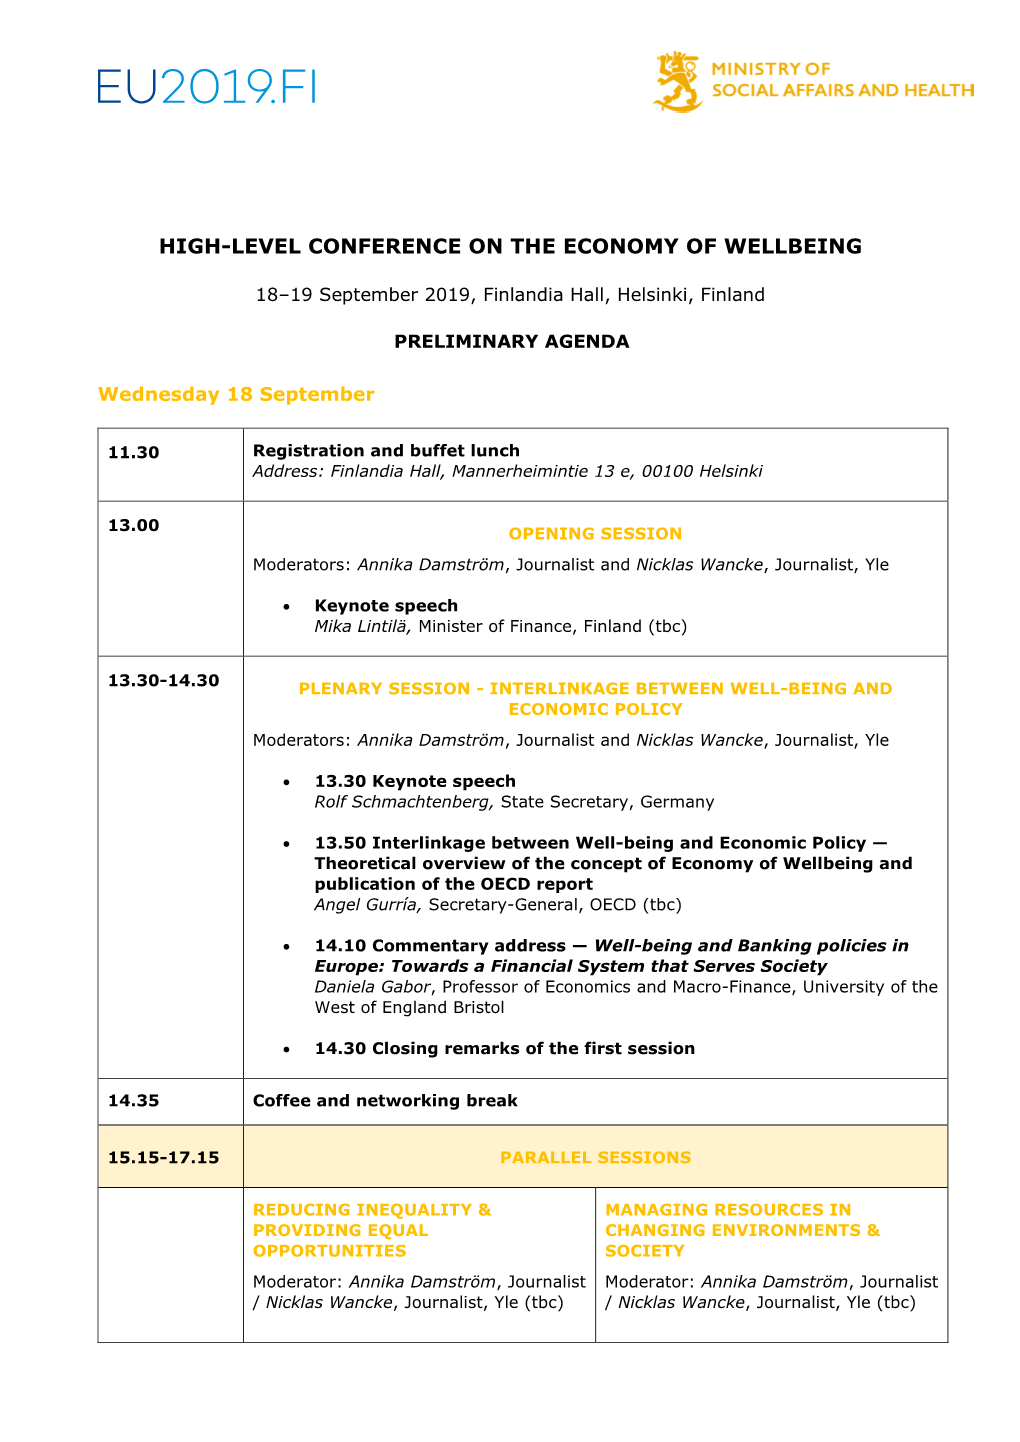 High-Level Conference on the Economy of Wellbeing